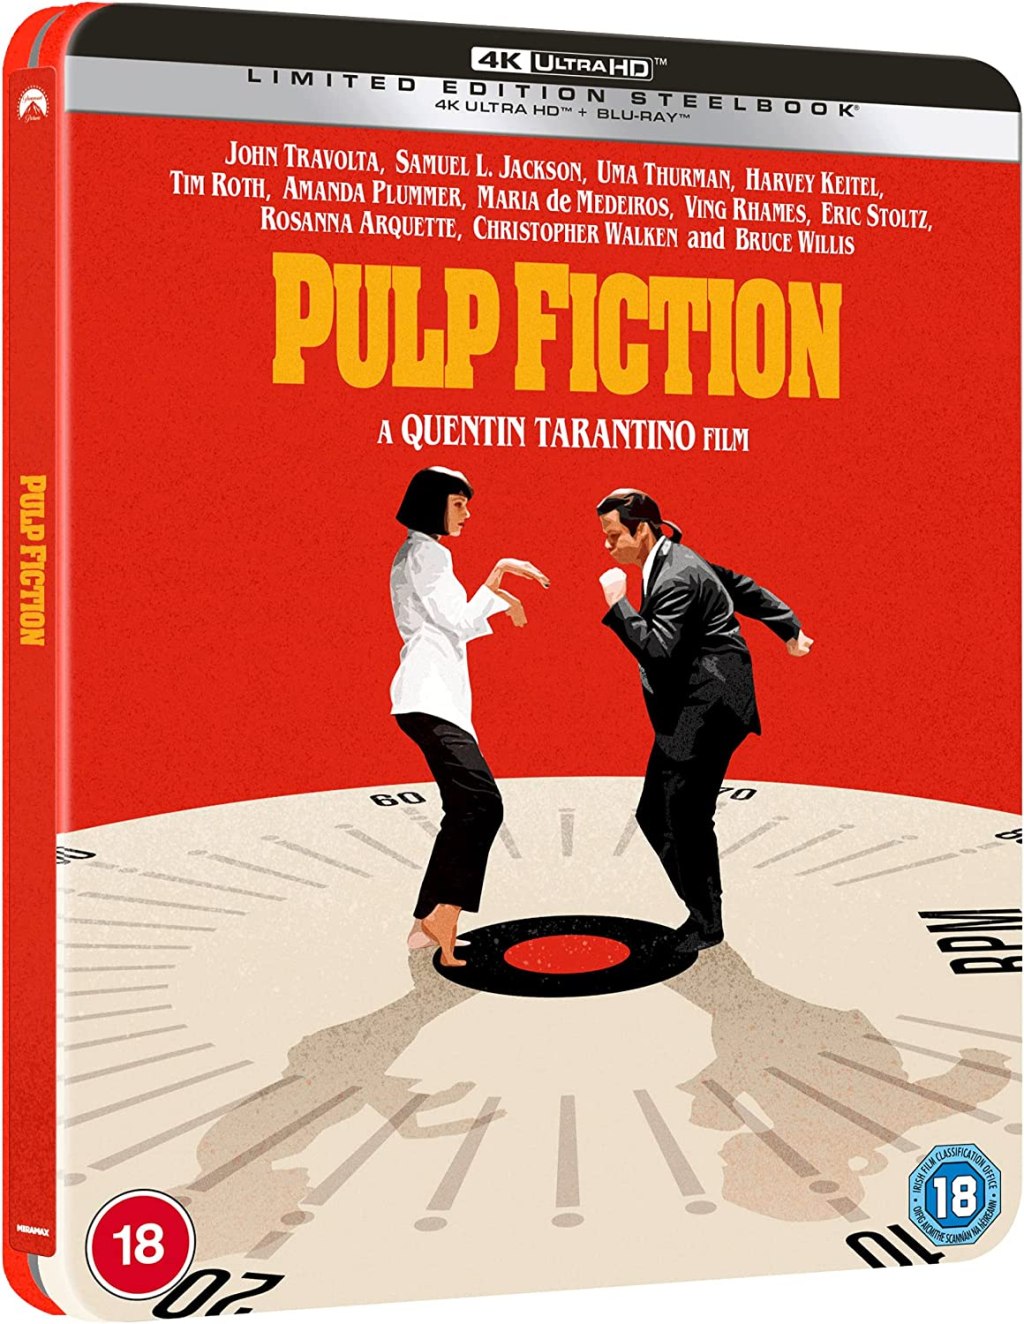 Quentin Tarantino’s Pulp Fiction is heading to 4K UHD for the very first time – Pre-order now!